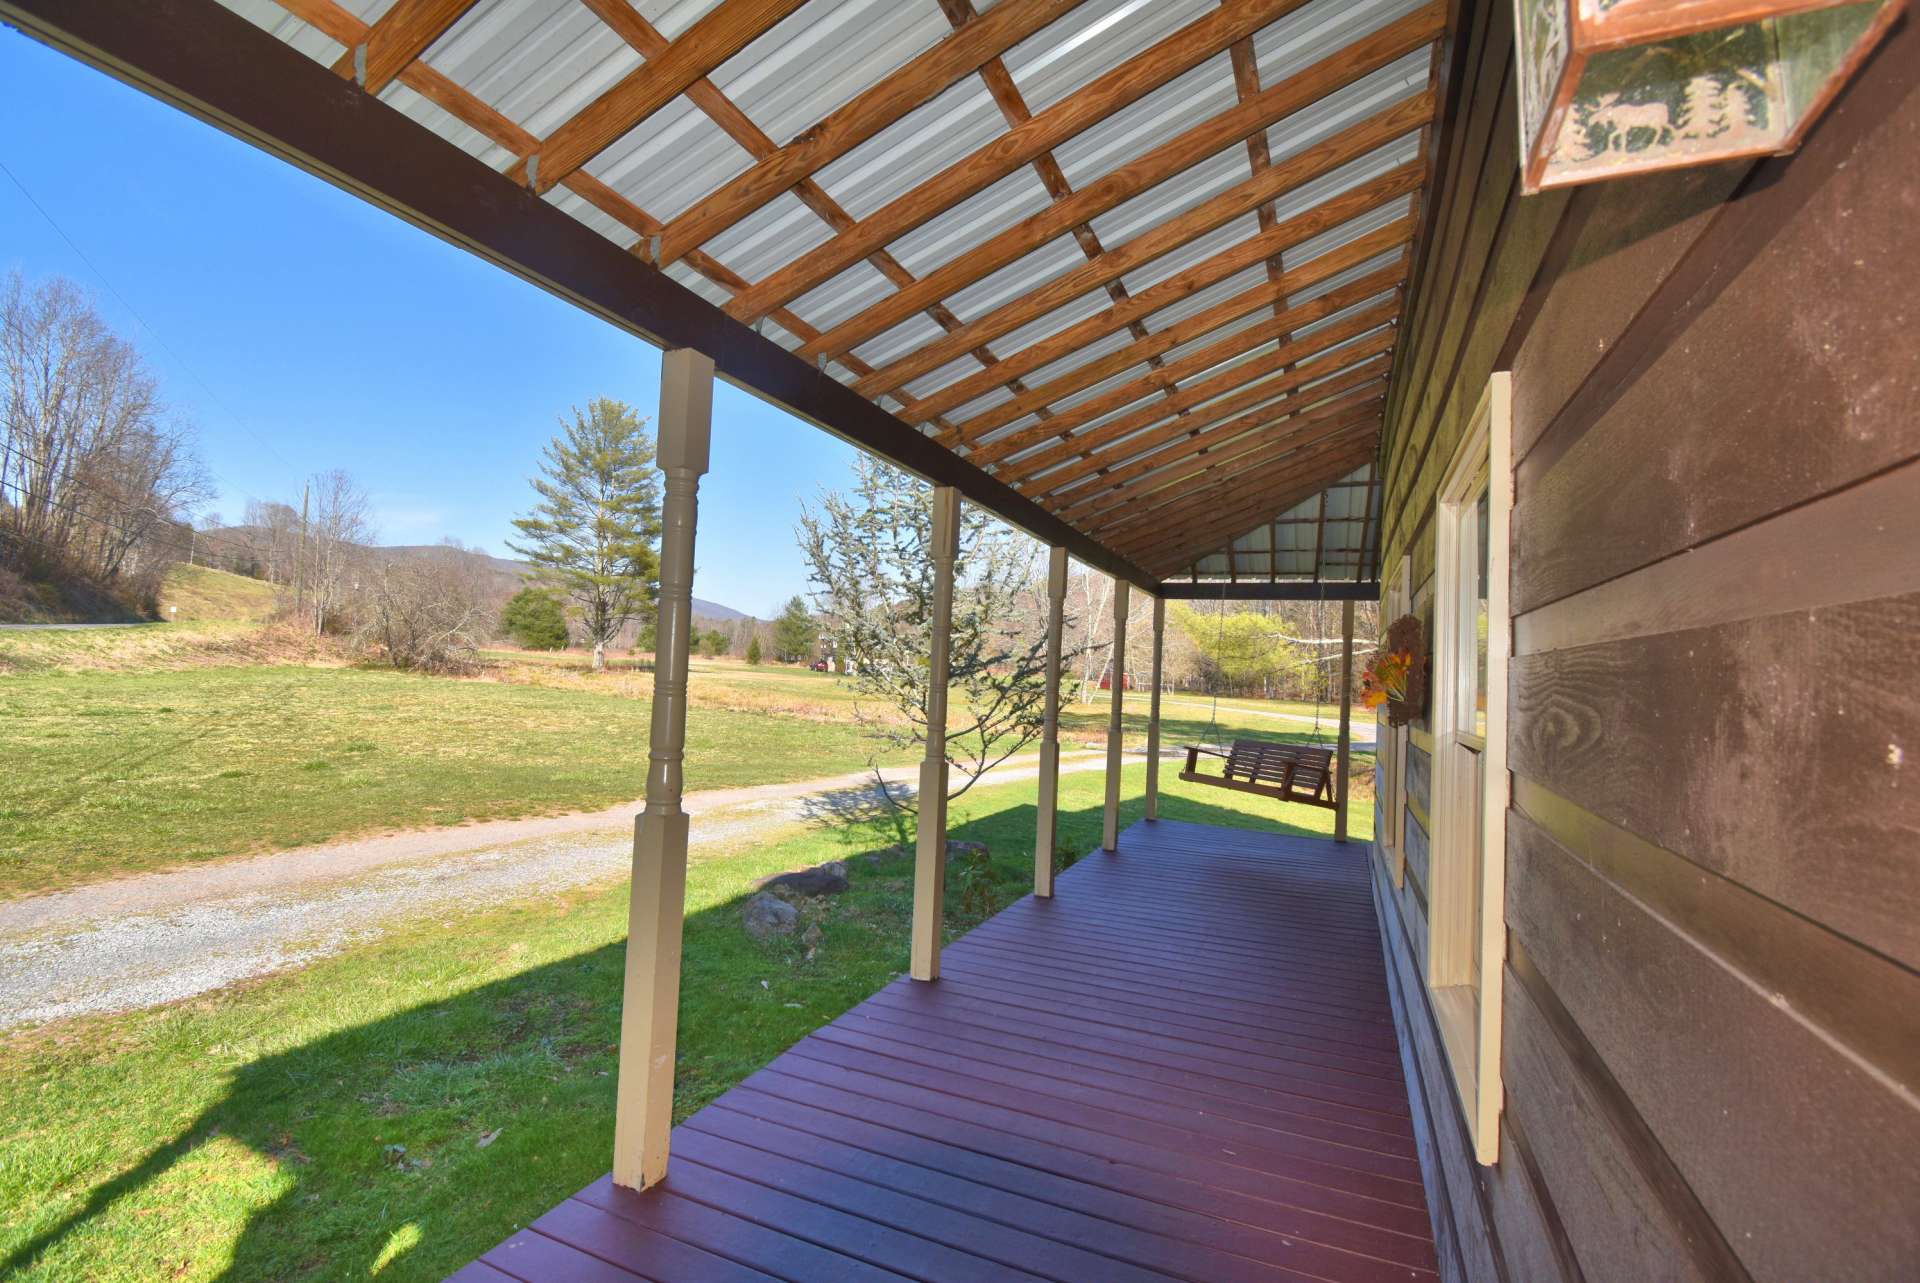 You will enjoy relaxing in the swing on the covered wrap porch. Plenty of outdoor grilling, dining, and entertaining space here.